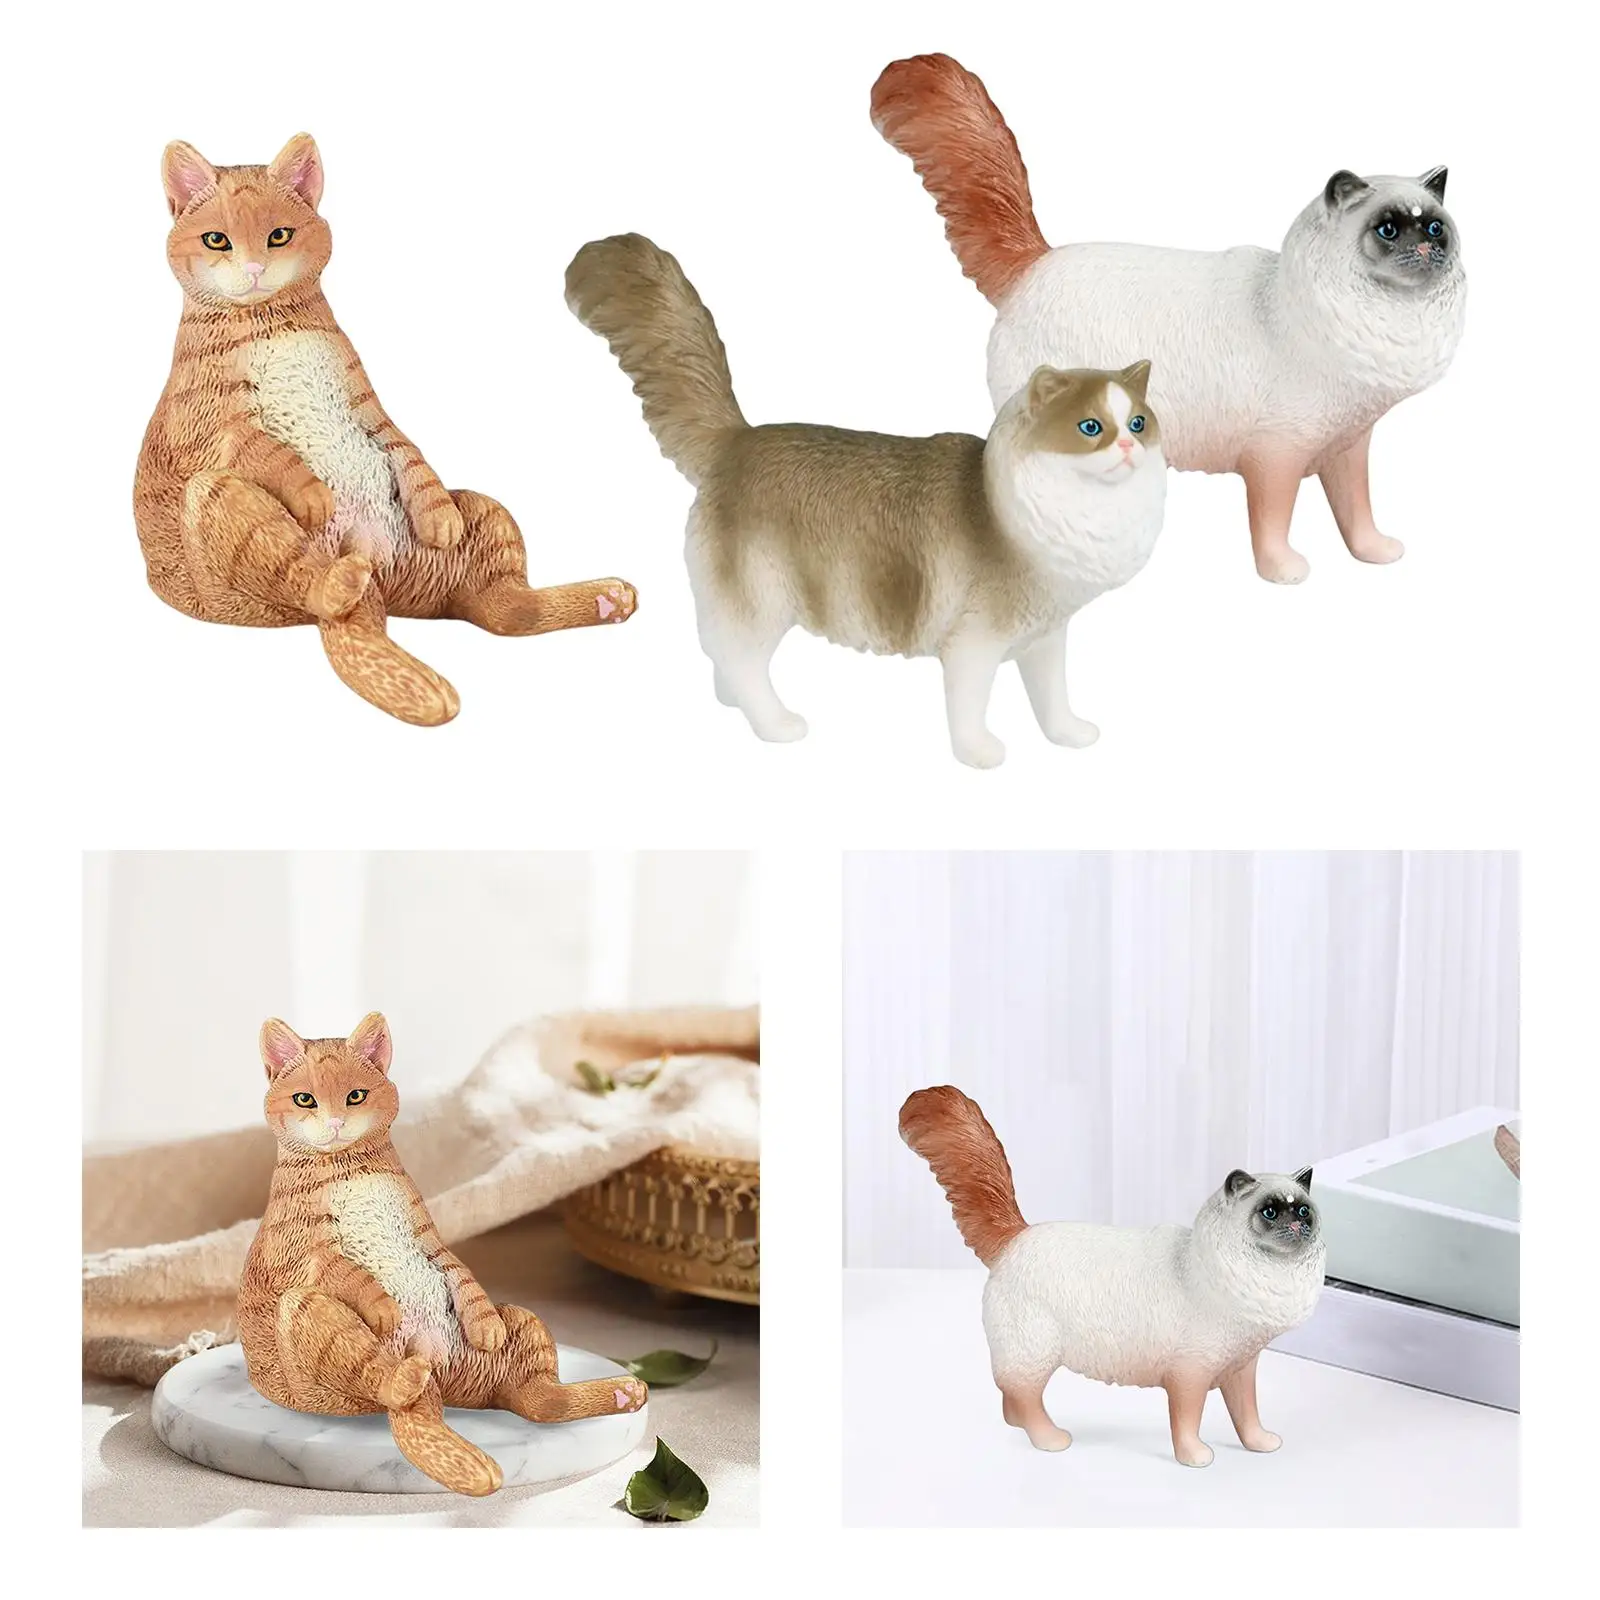 Cat Figurines Small Animals Figures Animal Cat Characters Toys Figurine for Home Decor Birthday Gifts